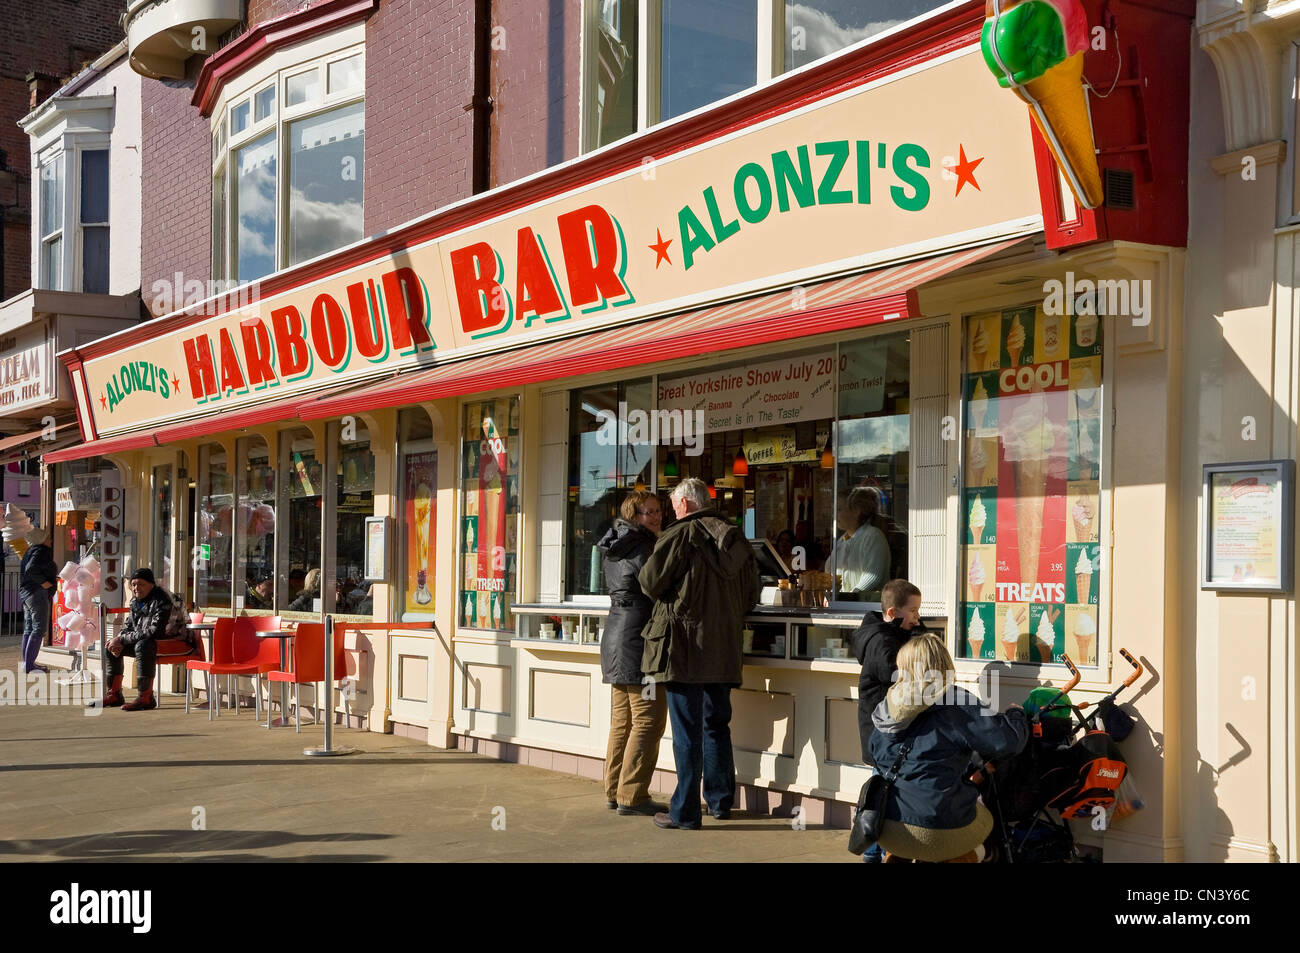 People tourists visitors at Harbour Bar cafe kiosk selling icecream and snacks in winter Scarborough North Yorkshire England UK United Kingdom Britain Stock Photo